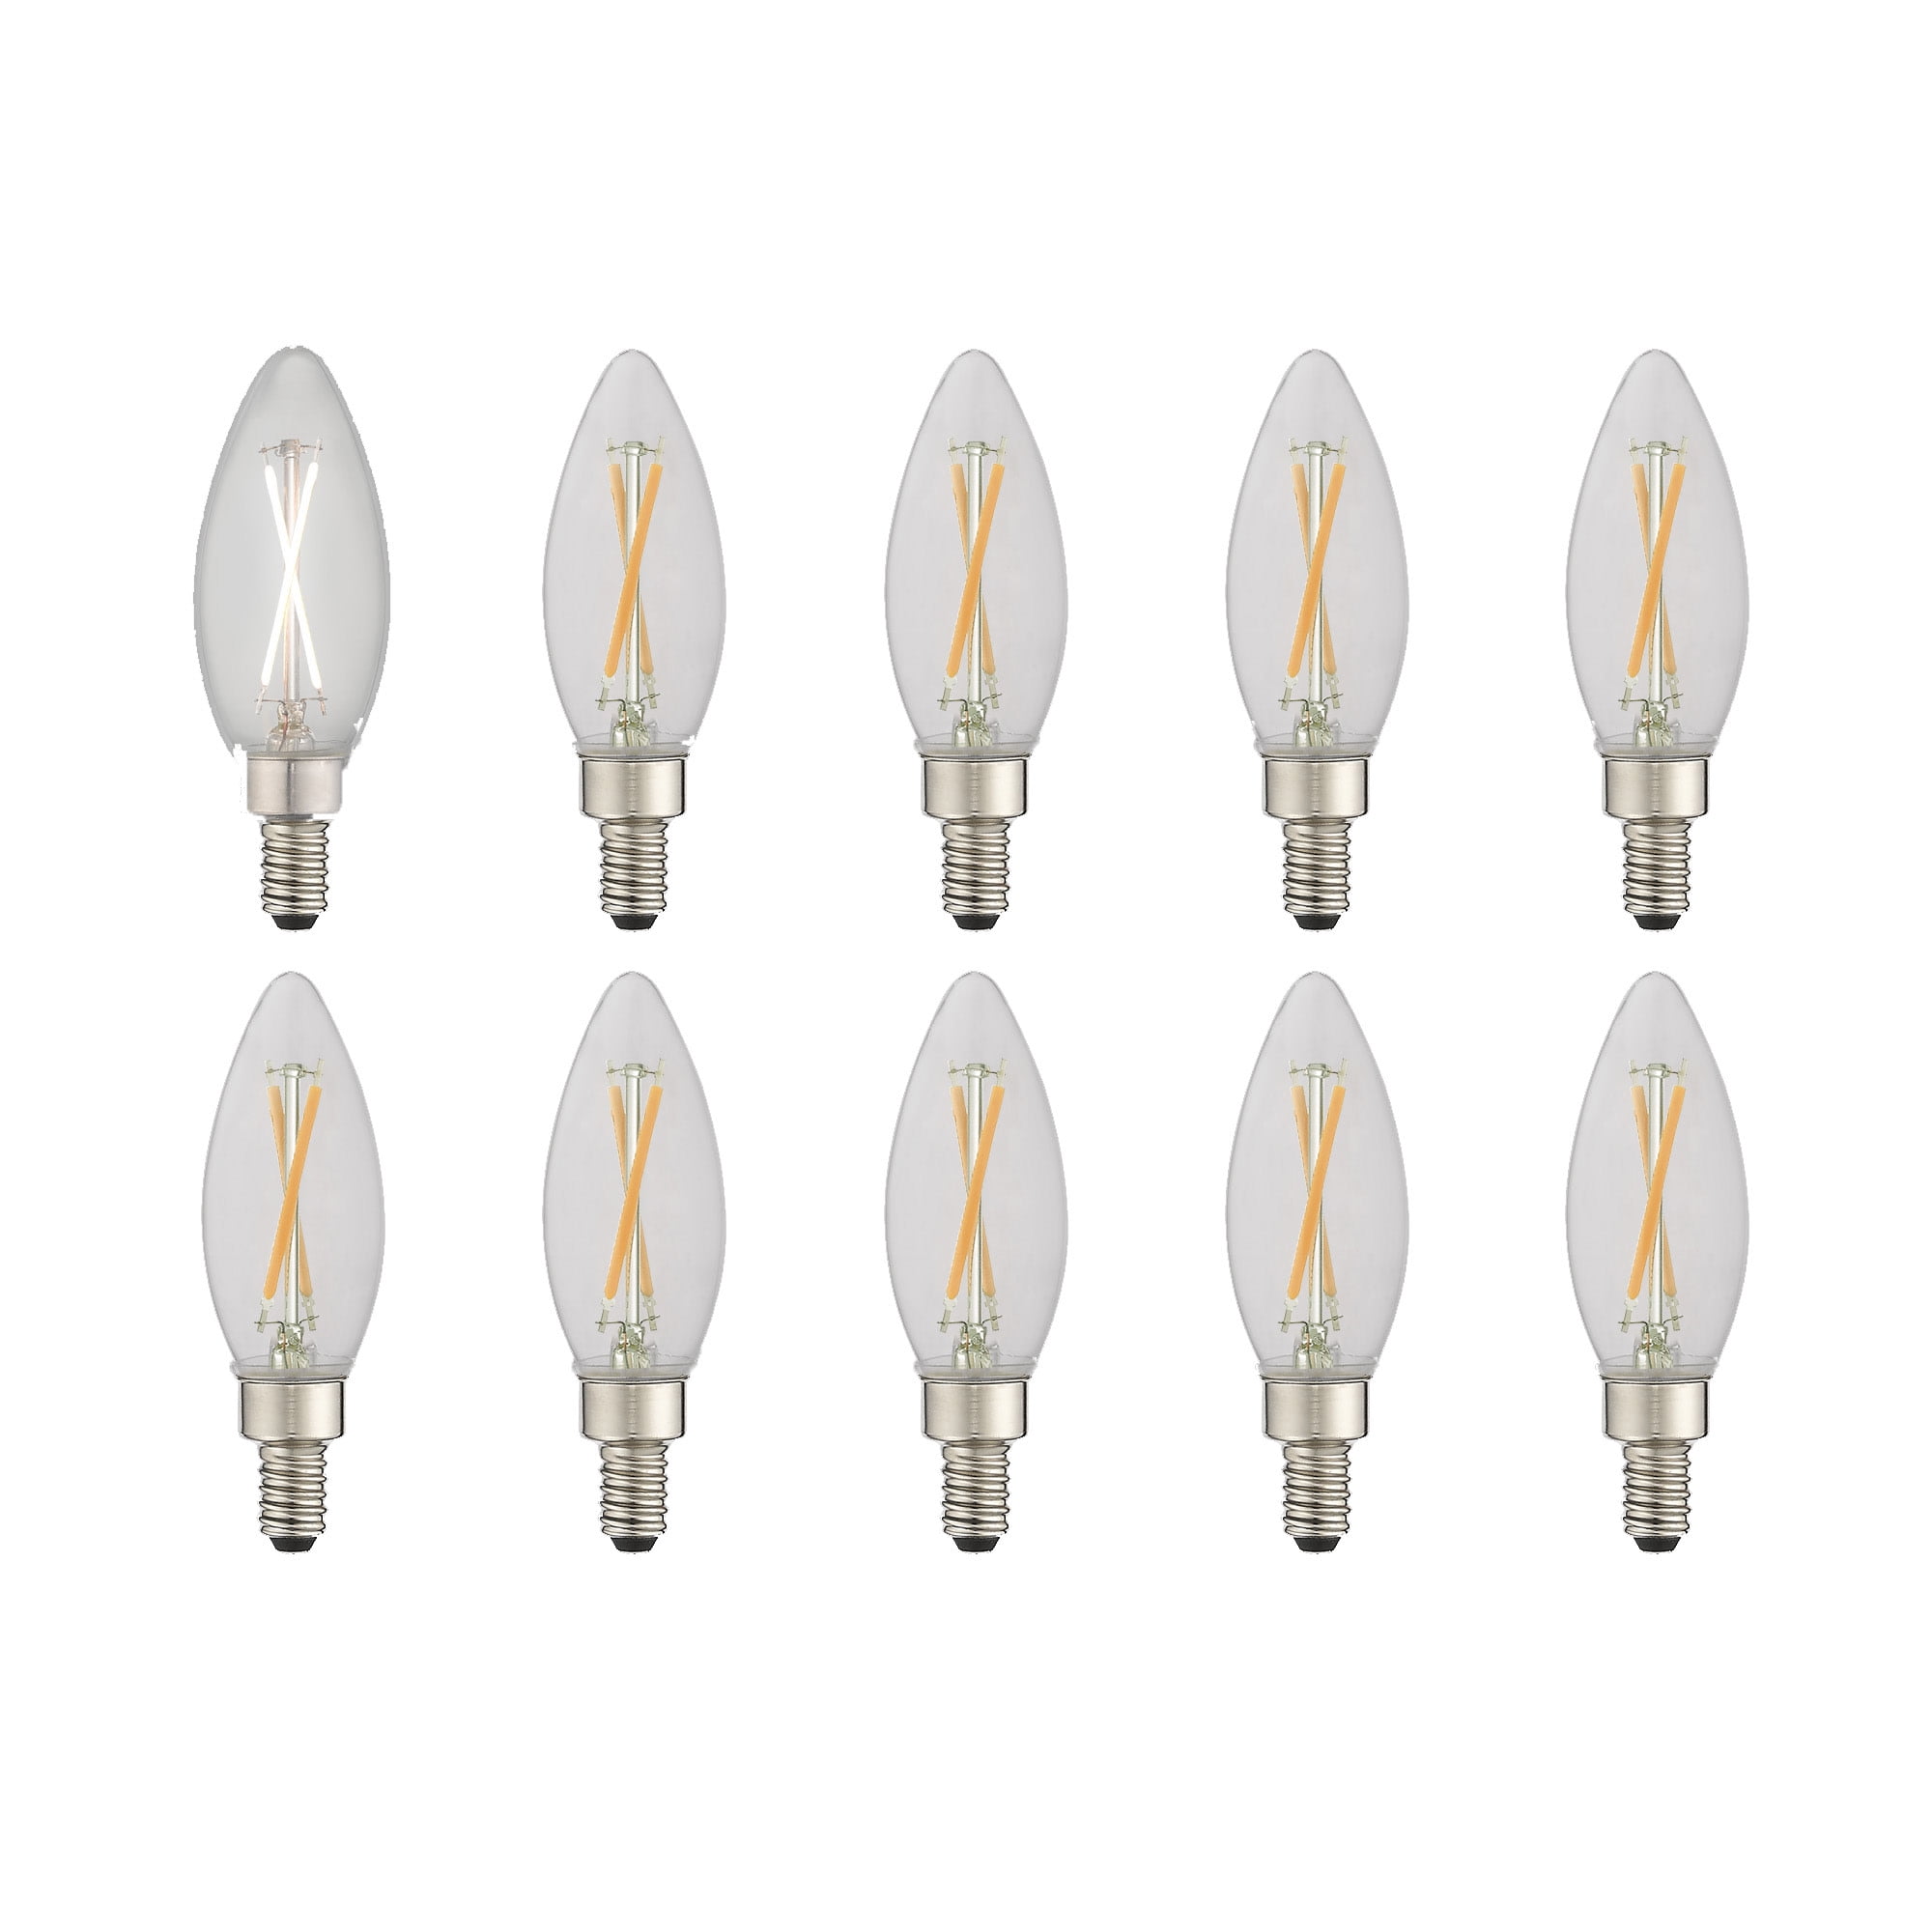 Clear Glass Livex 920206X10 Candelabra LED Case of 10 Bulbs Collection in Light Finish